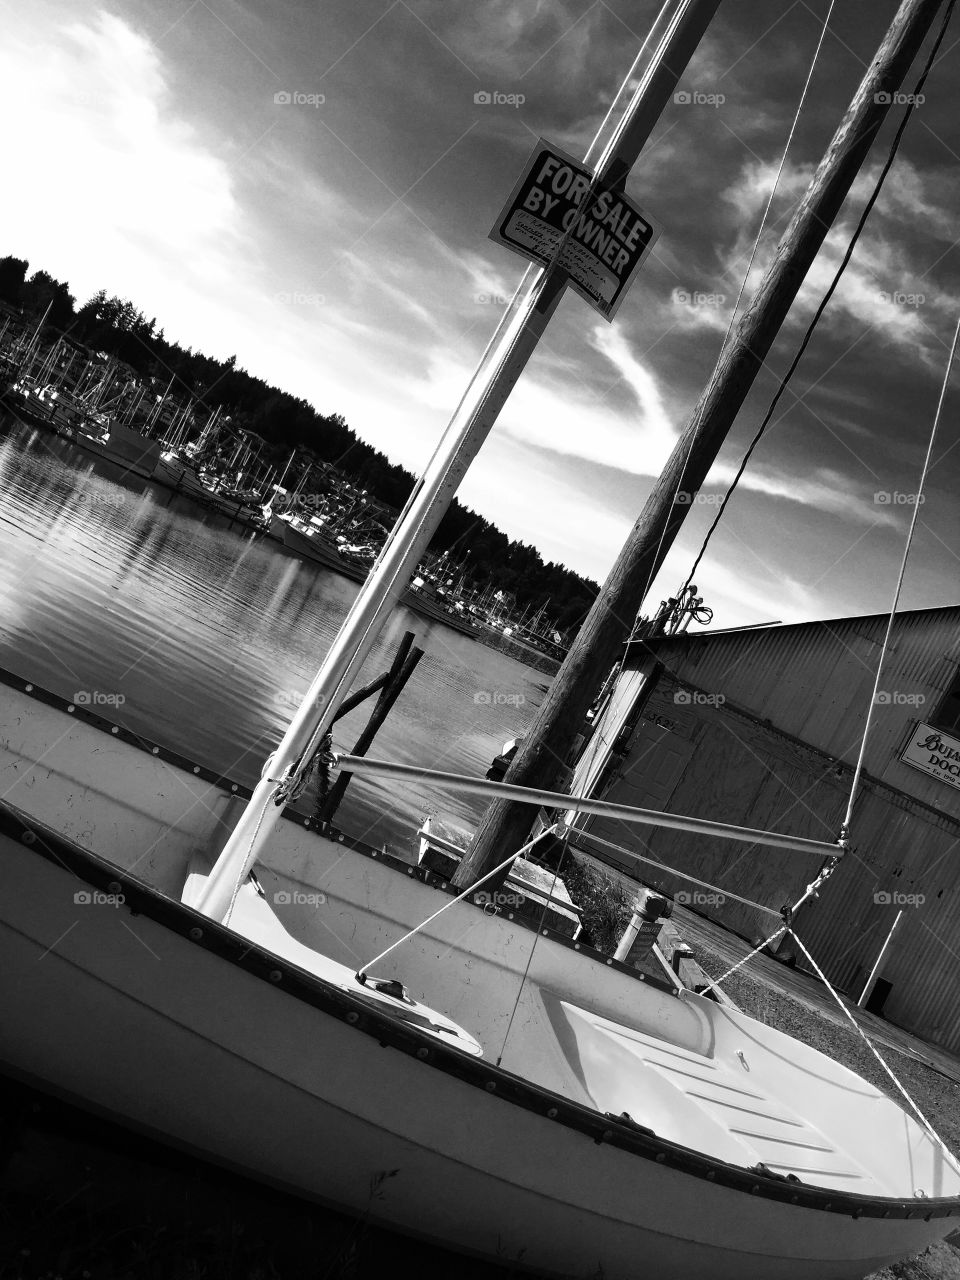 Sailboat for Sale